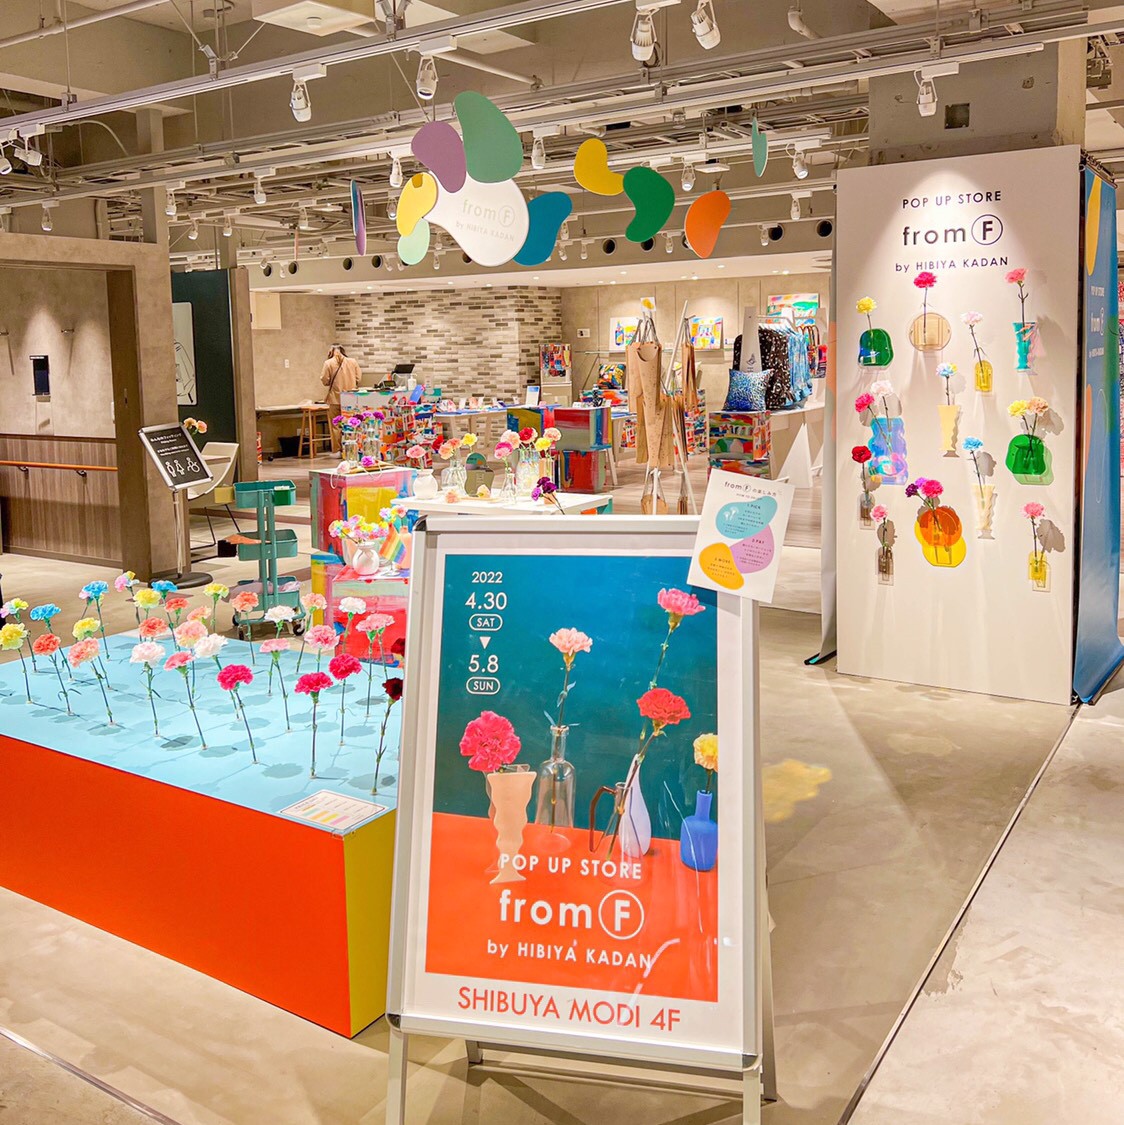 Flower pop-up store “from F by HIBIYA KADAN” for Mother’s Day period only